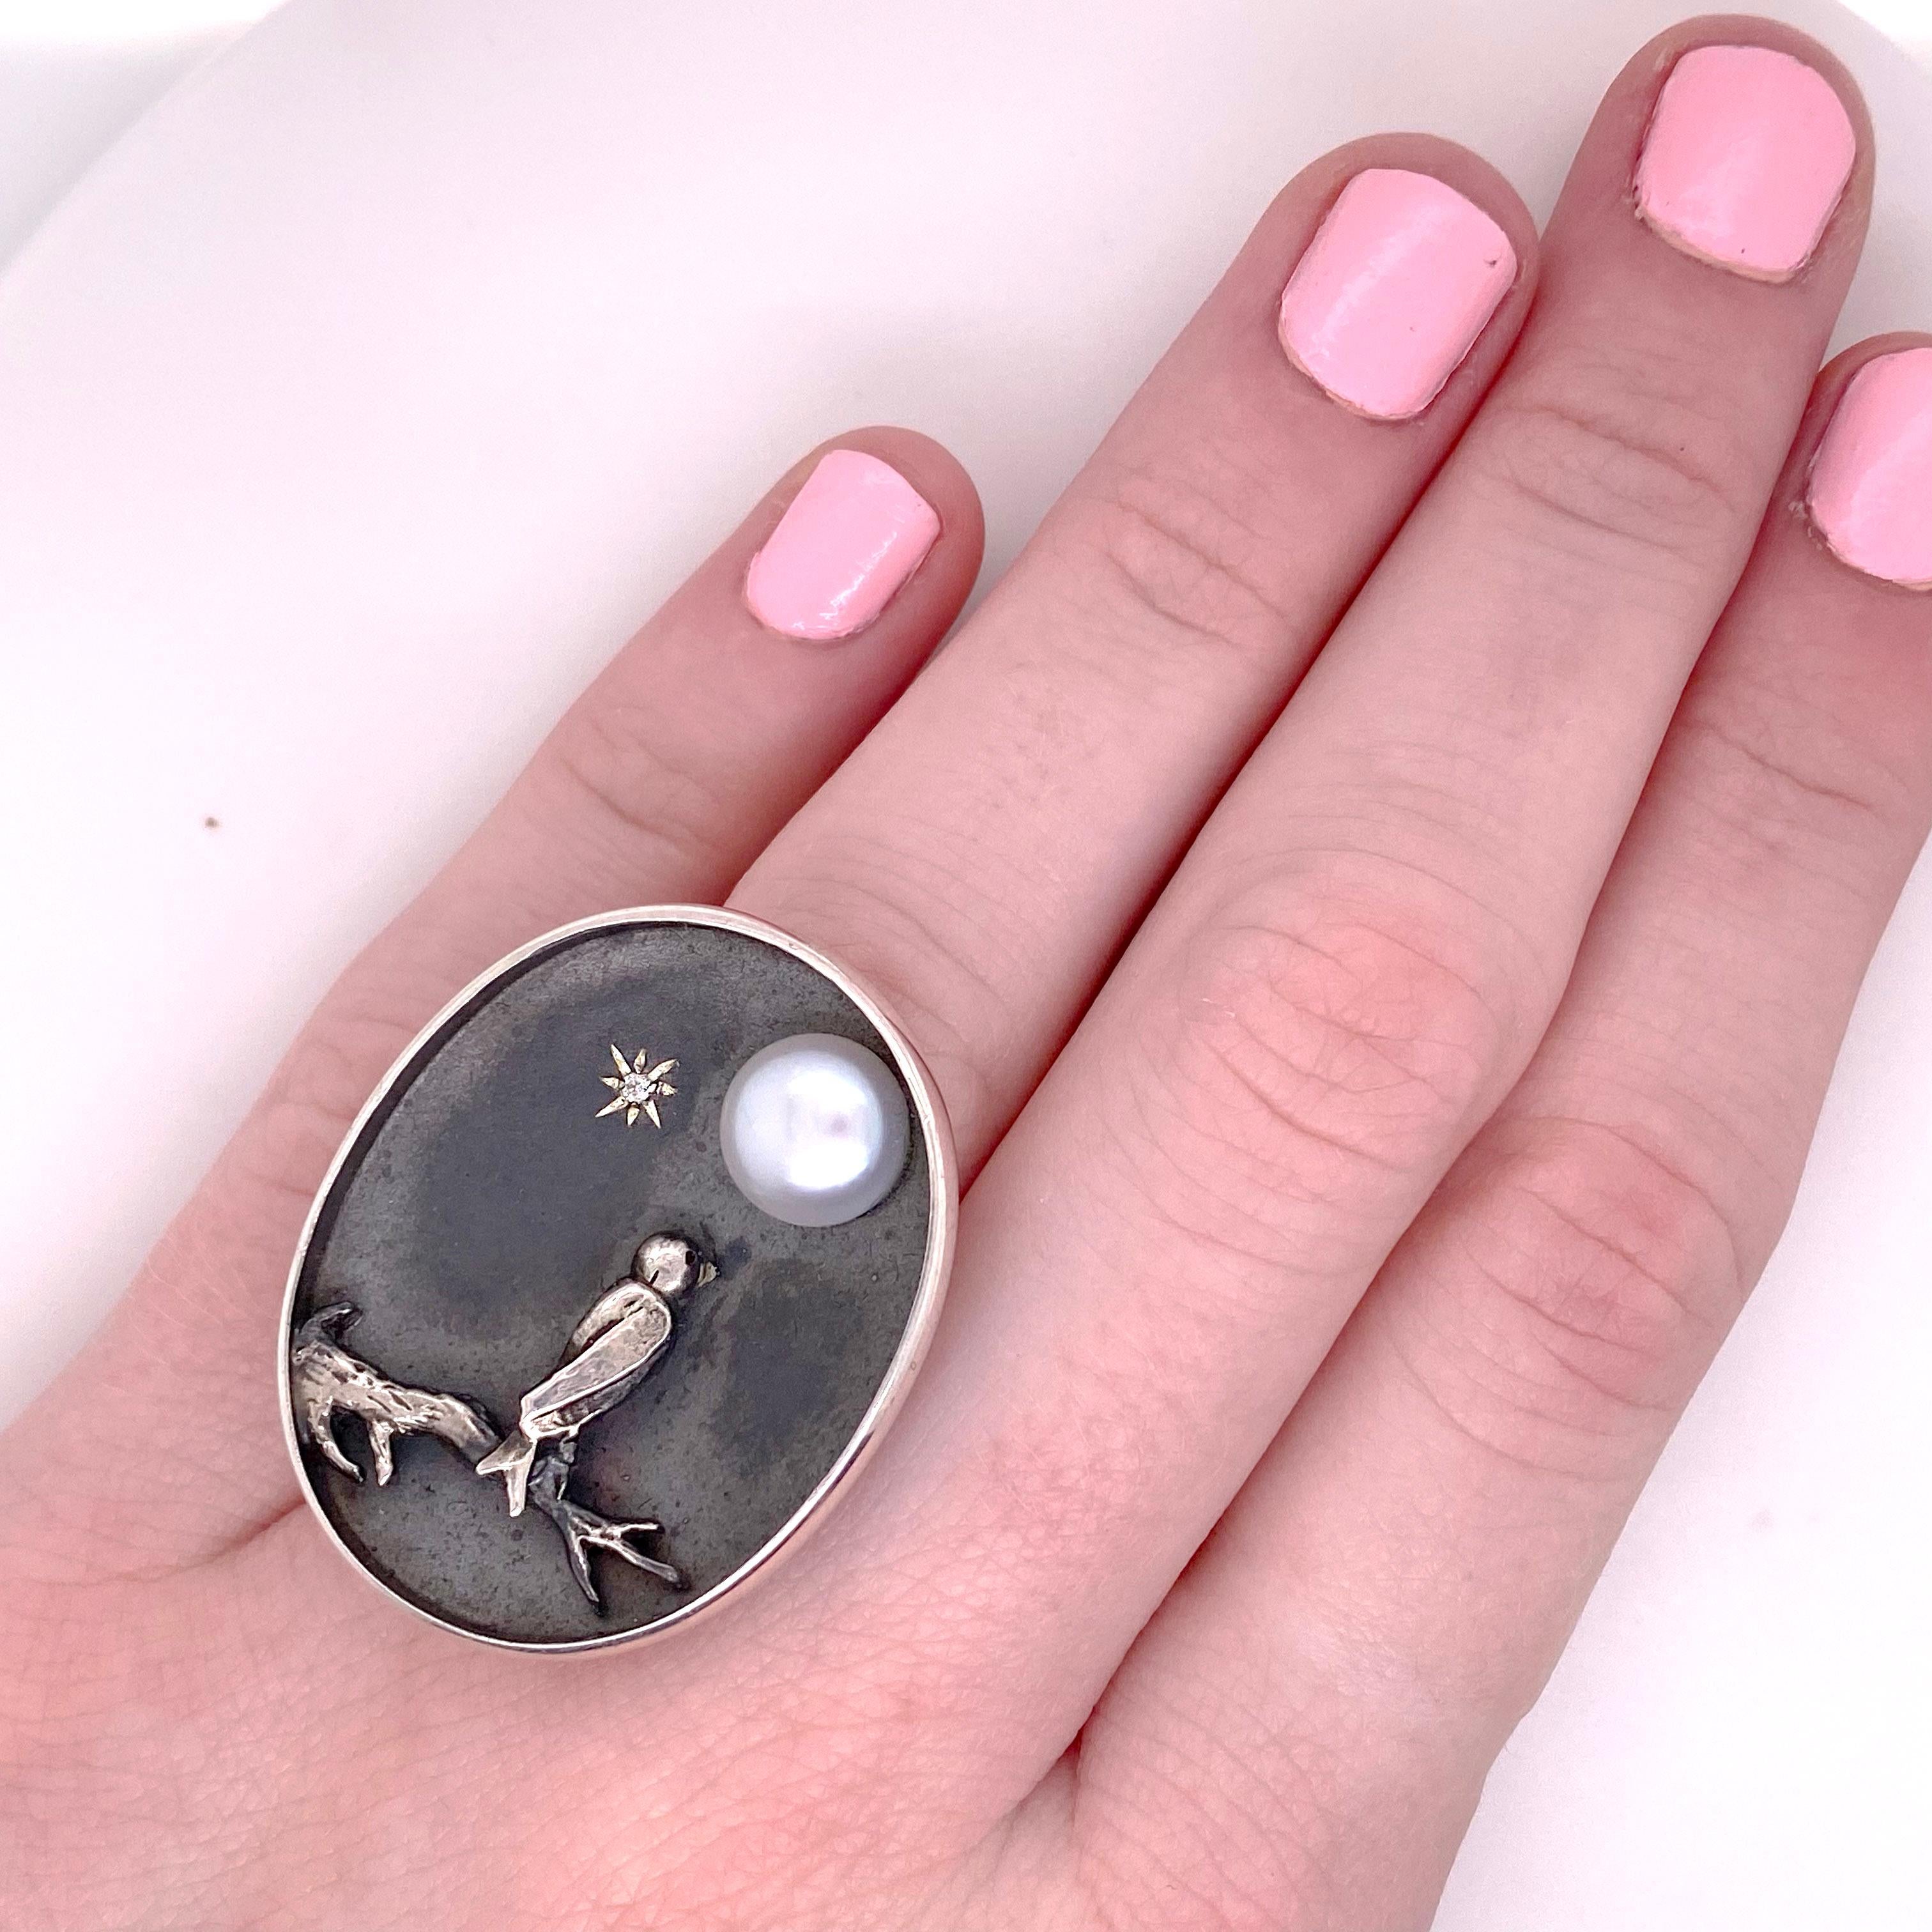 By the Moonlight features a raised silver tree branch with a bird looking up to the Pearl Moon. The gorgeous oval shape with the black oxidation background makes the silver branch and bird really pop.  There is a sparkle for the North Star and a